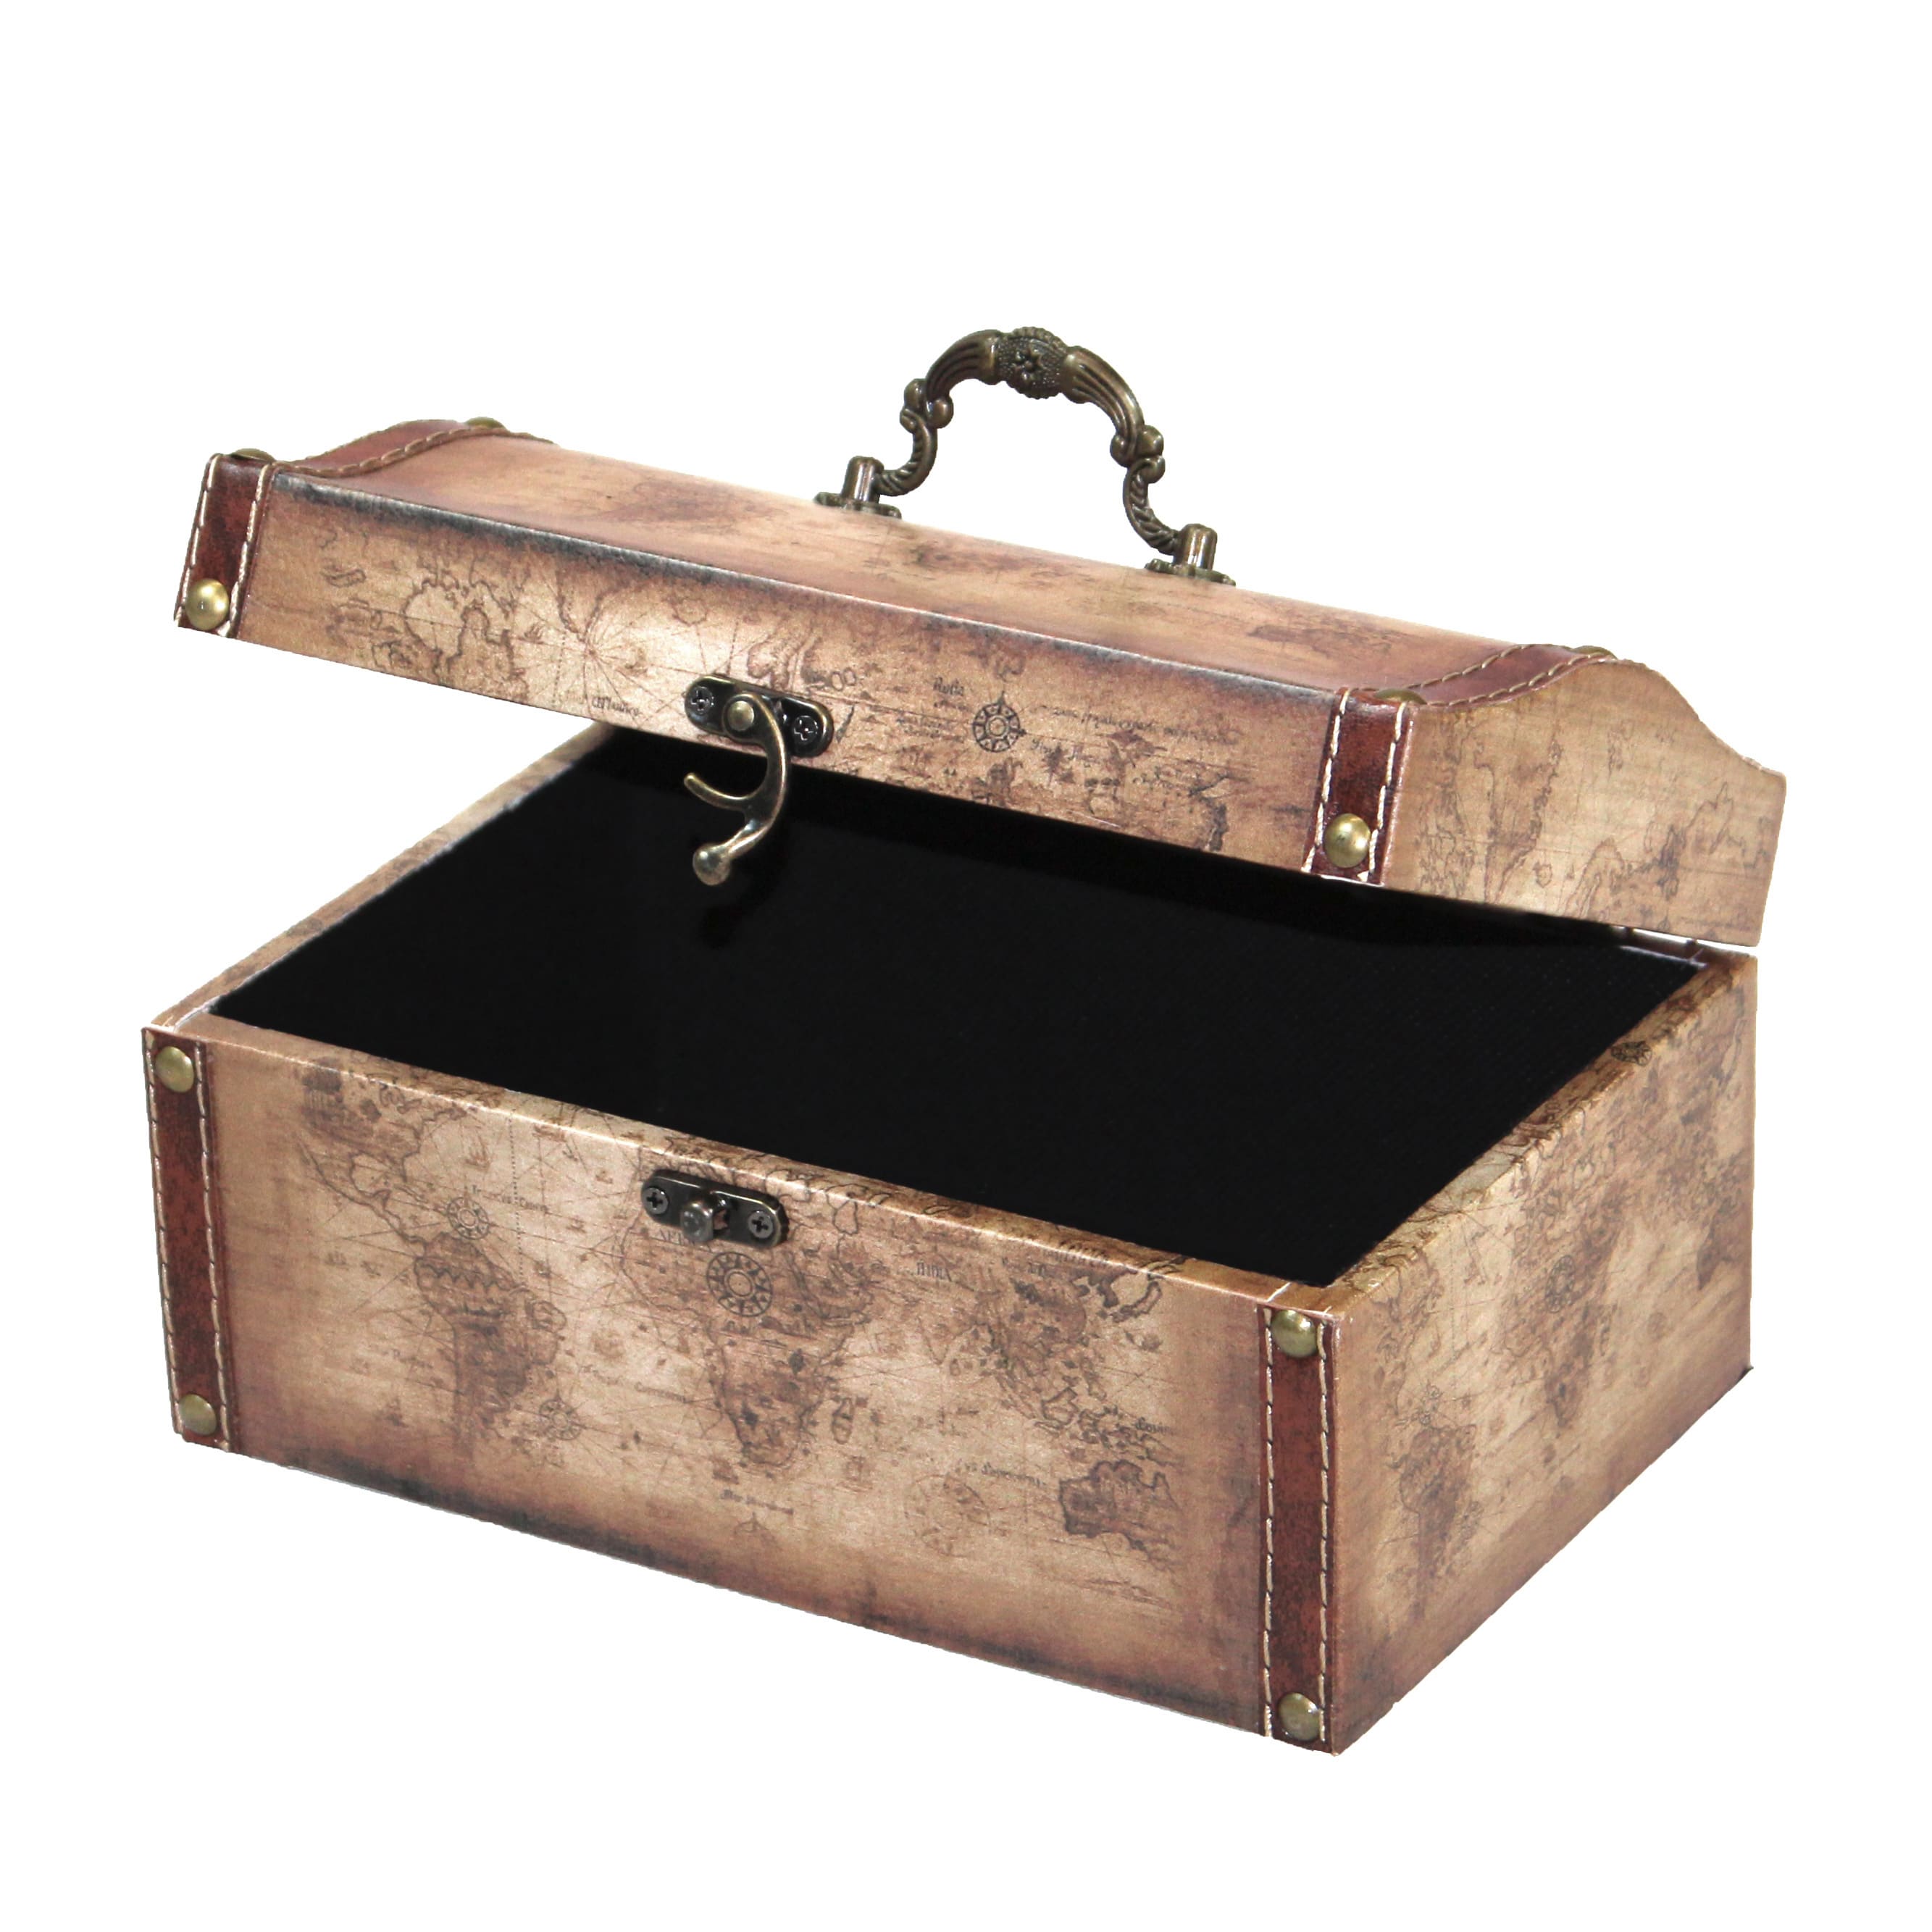 Buy Decorative Trunks Online at Overstock | Our Best ...